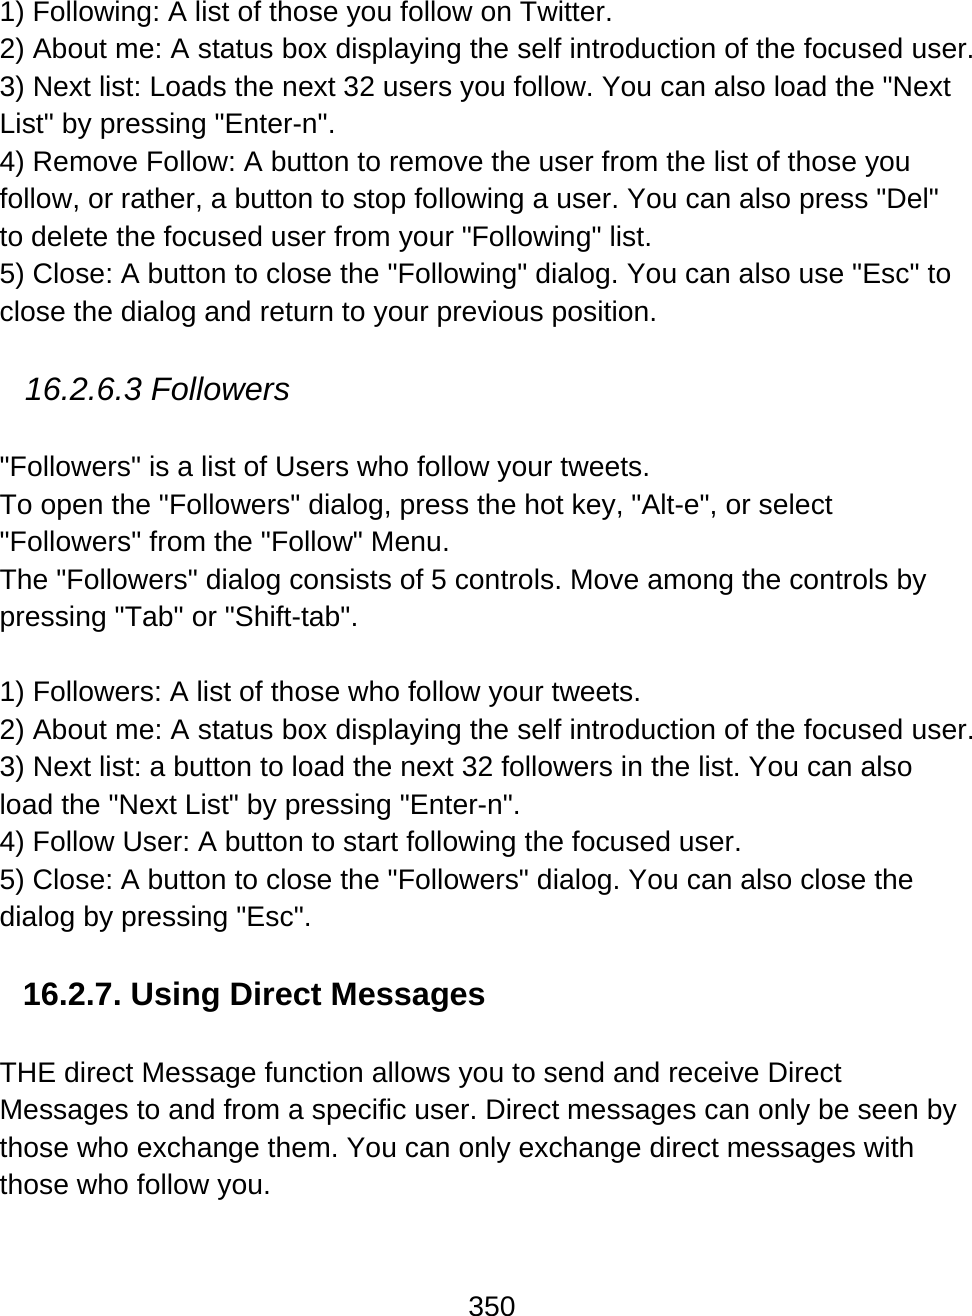 350  1) Following: A list of those you follow on Twitter. 2) About me: A status box displaying the self introduction of the focused user. 3) Next list: Loads the next 32 users you follow. You can also load the &quot;Next List&quot; by pressing &quot;Enter-n&quot;. 4) Remove Follow: A button to remove the user from the list of those you follow, or rather, a button to stop following a user. You can also press &quot;Del&quot; to delete the focused user from your &quot;Following&quot; list. 5) Close: A button to close the &quot;Following&quot; dialog. You can also use &quot;Esc&quot; to close the dialog and return to your previous position.  16.2.6.3 Followers  &quot;Followers&quot; is a list of Users who follow your tweets. To open the &quot;Followers&quot; dialog, press the hot key, &quot;Alt-e&quot;, or select &quot;Followers&quot; from the &quot;Follow&quot; Menu.  The &quot;Followers&quot; dialog consists of 5 controls. Move among the controls by pressing &quot;Tab&quot; or &quot;Shift-tab&quot;.  1) Followers: A list of those who follow your tweets. 2) About me: A status box displaying the self introduction of the focused user. 3) Next list: a button to load the next 32 followers in the list. You can also load the &quot;Next List&quot; by pressing &quot;Enter-n&quot;. 4) Follow User: A button to start following the focused user. 5) Close: A button to close the &quot;Followers&quot; dialog. You can also close the dialog by pressing &quot;Esc&quot;.   16.2.7. Using Direct Messages  THE direct Message function allows you to send and receive Direct Messages to and from a specific user. Direct messages can only be seen by those who exchange them. You can only exchange direct messages with those who follow you.    